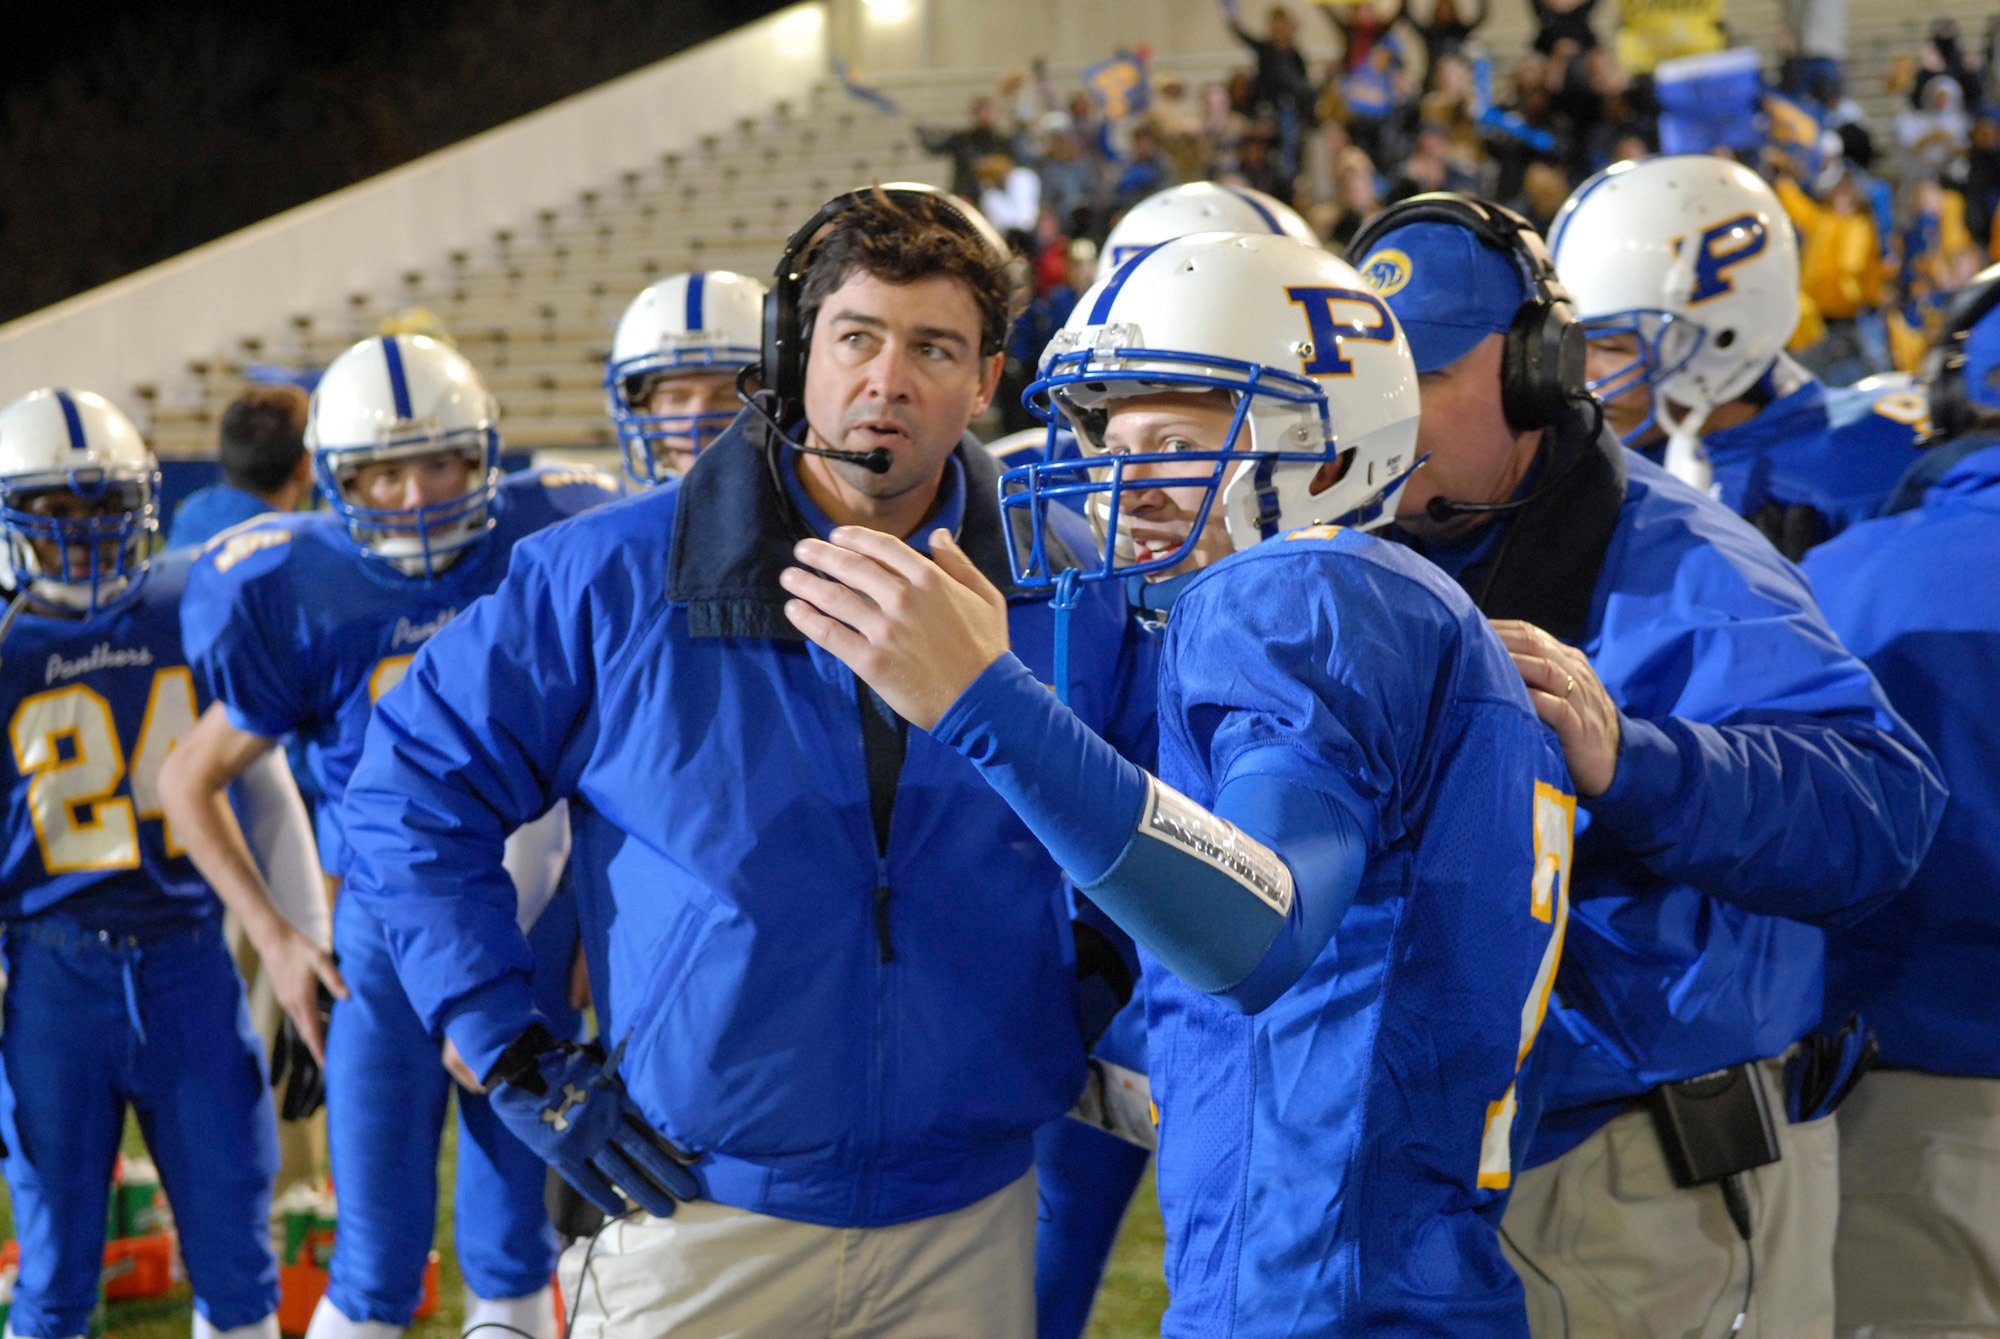 Kyle Chandler, and Zach Gilford wearing blue football attire in NBC's 'Friday Night Lights.'